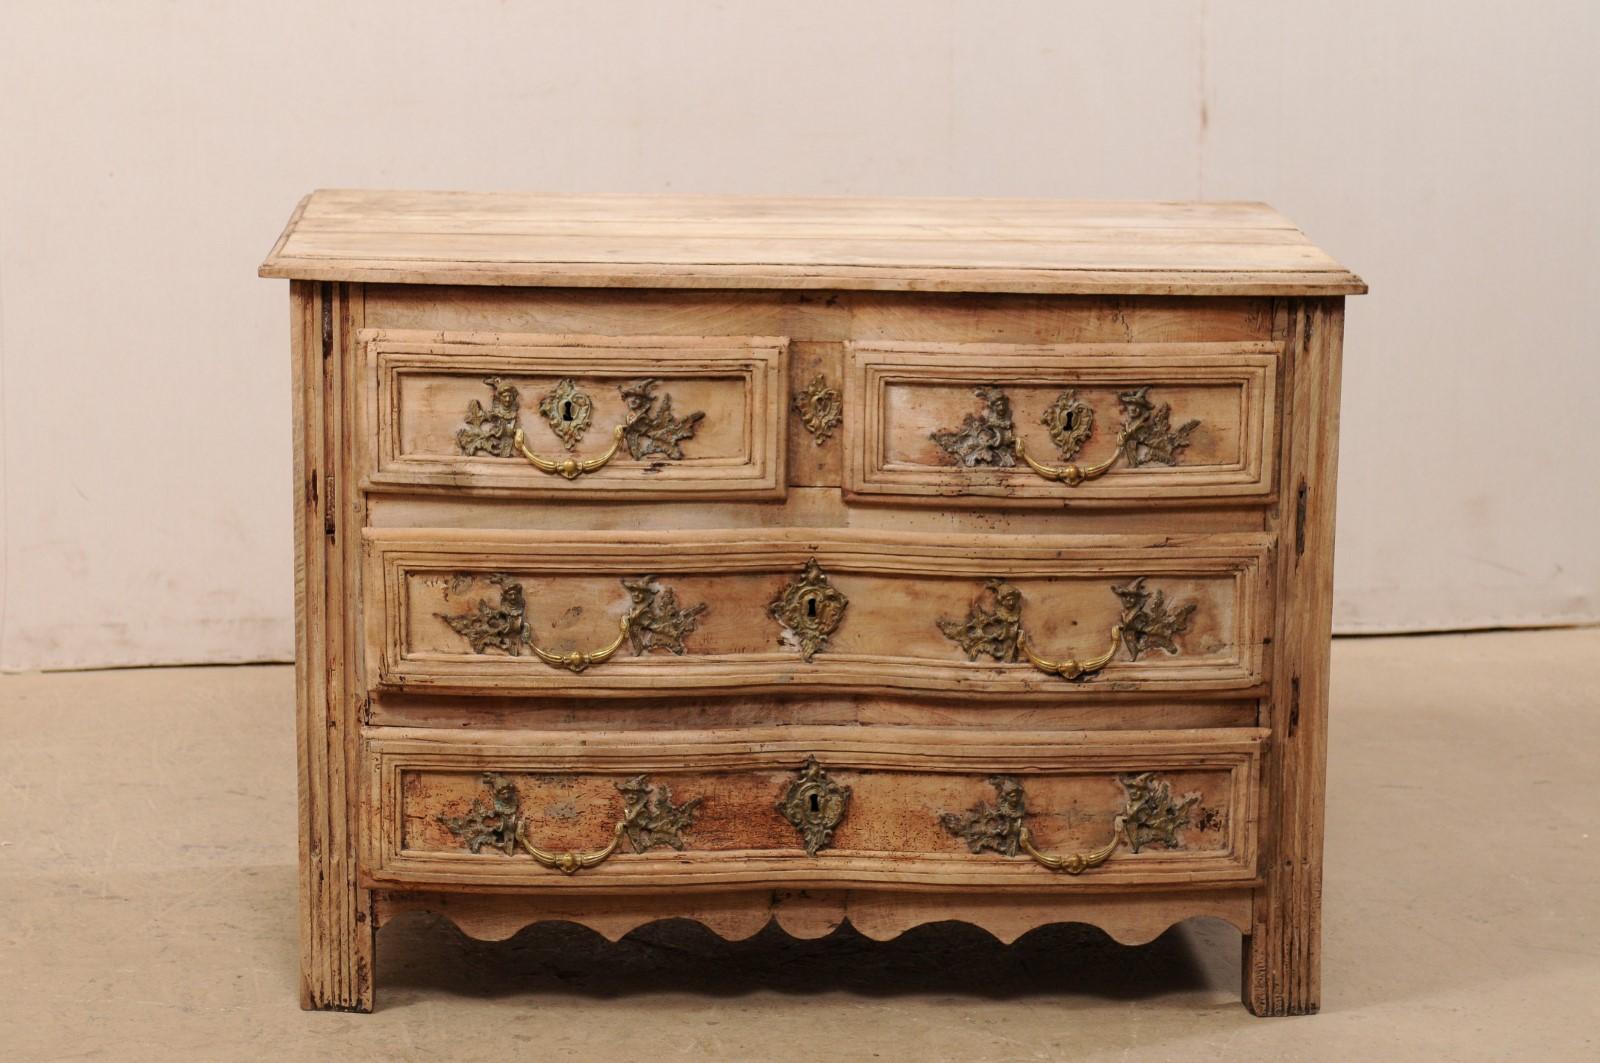 Bleached French Period Rococo Serpentine Front Carved-Wood Chest with Elaborate Hardware